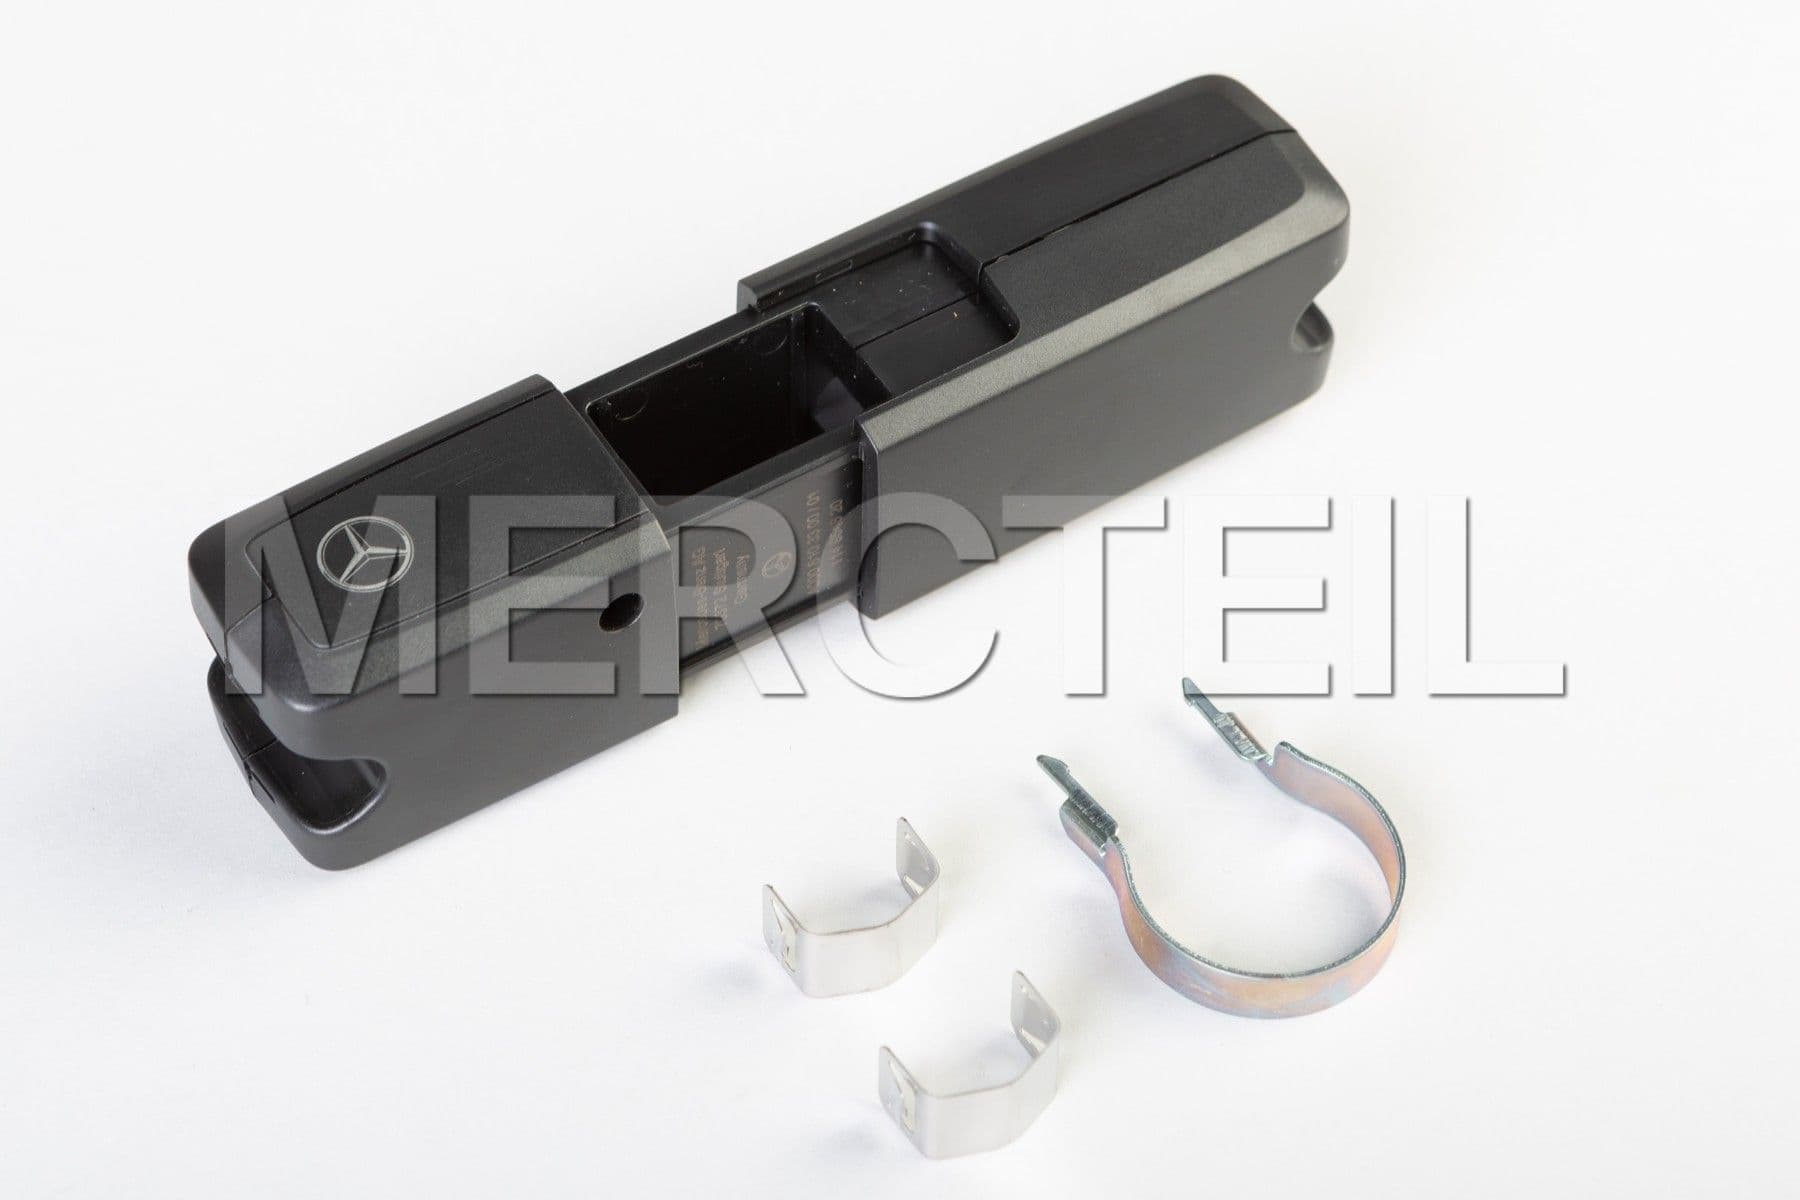 Base Support Style & Travel Equipment Genuine Mercedes Benz (part number: A0008103300)